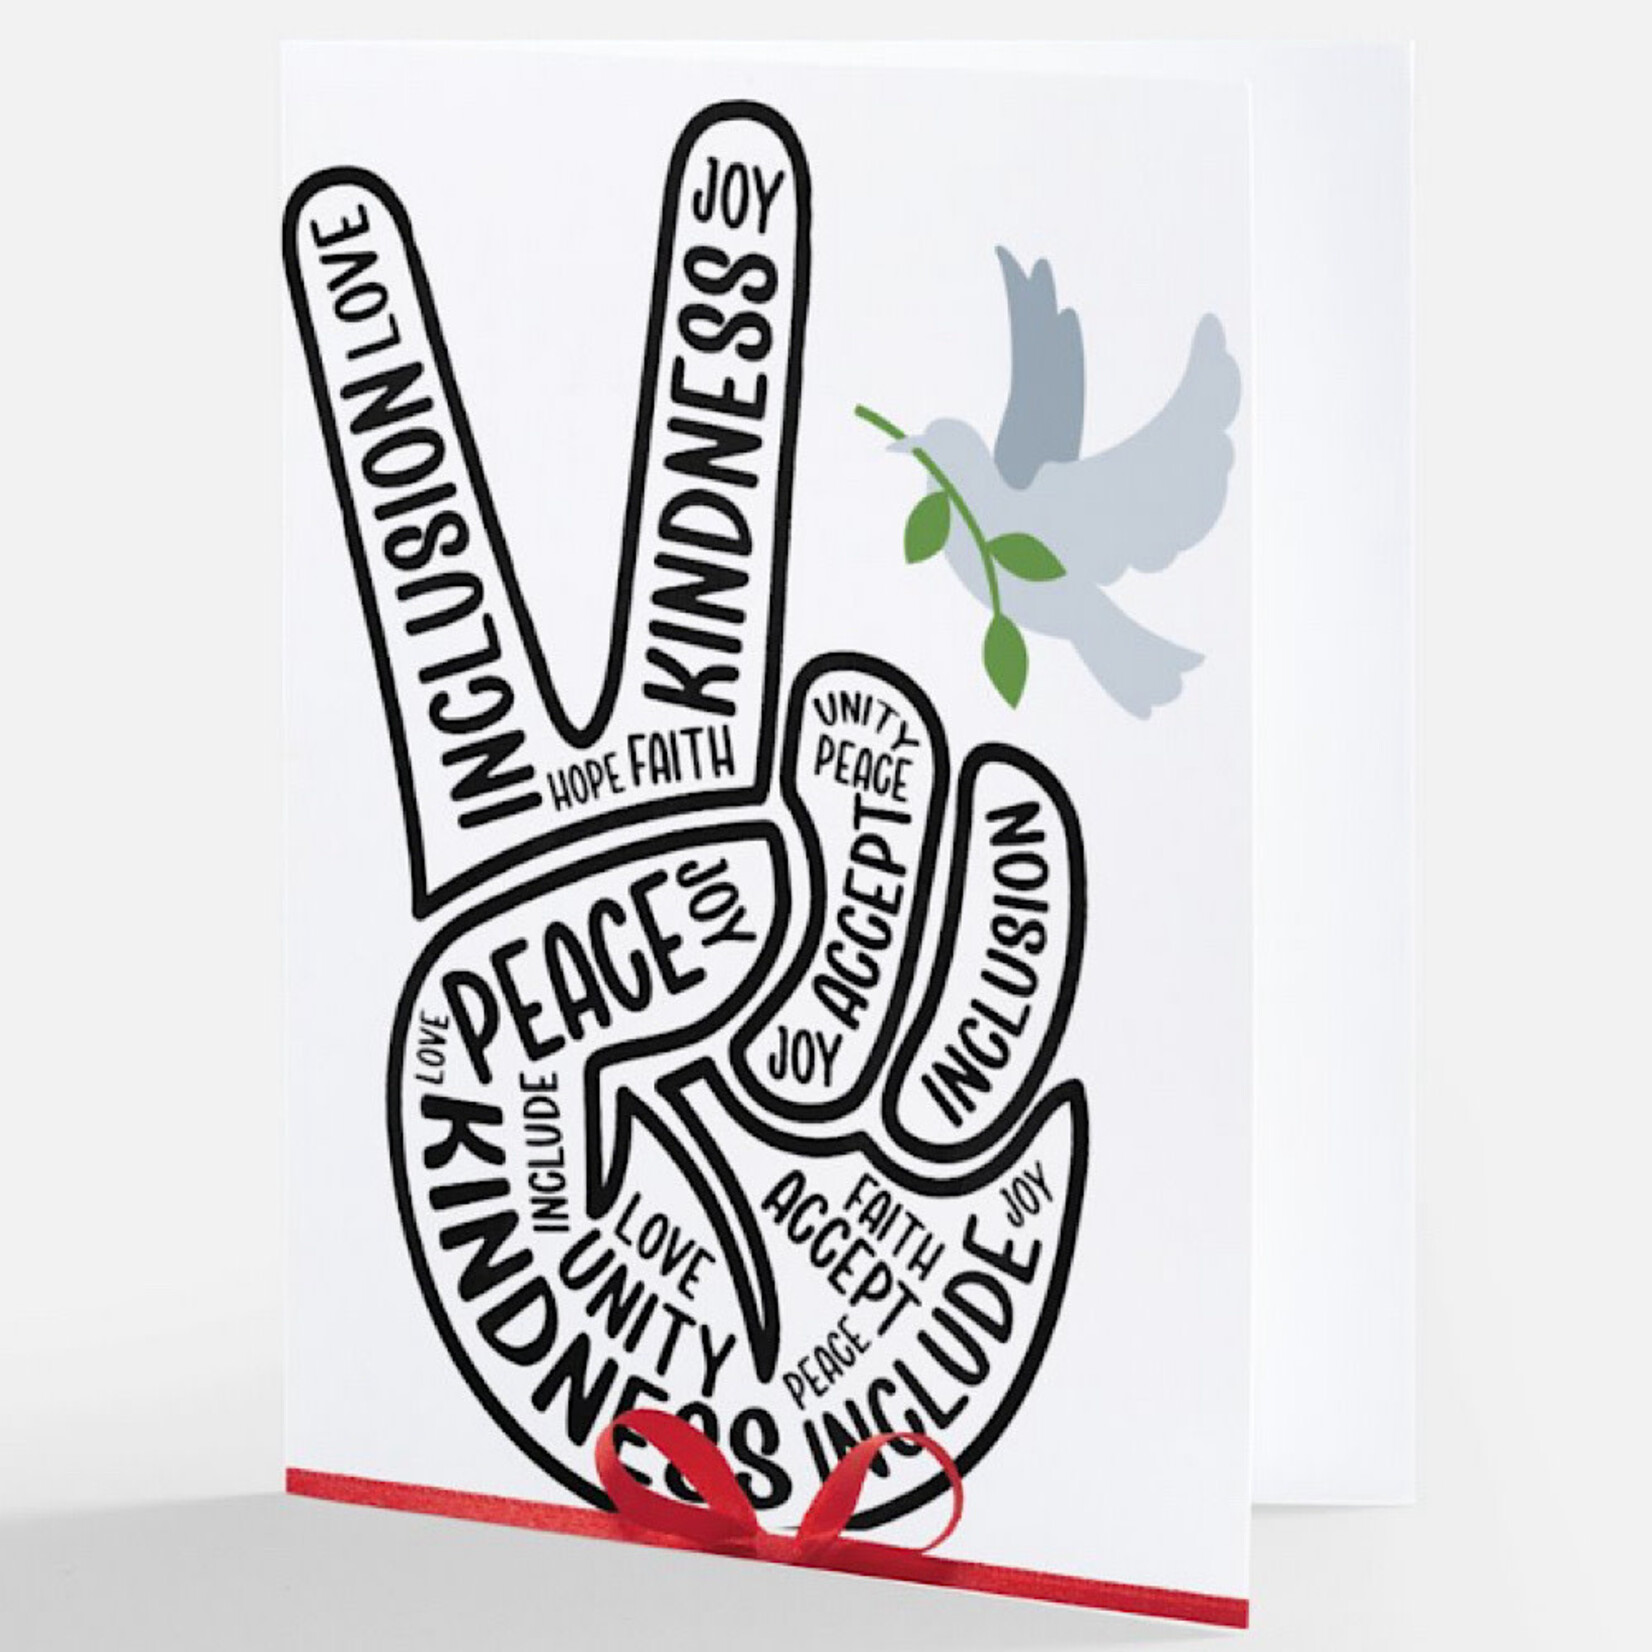 Bad Annie’s Card (Holiday) - Peace Sign Hand Inclusion Love Joy Kindness Unity